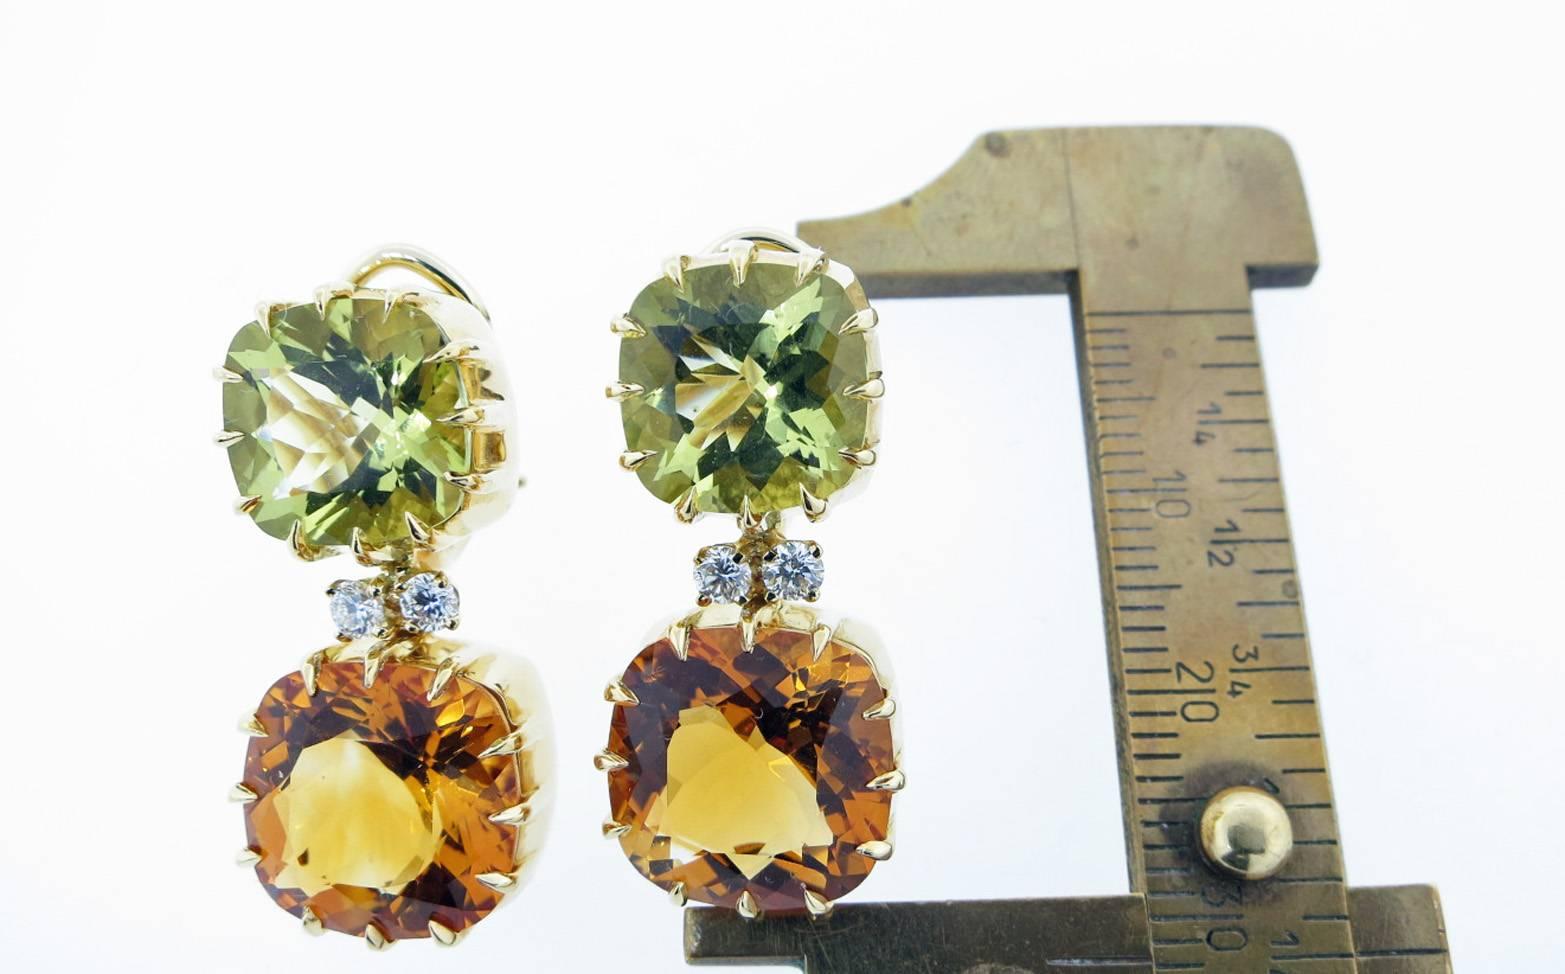 18kt. yellow gold dangle earrings by Seaman Schepps. Each earring is set with a cushion cut faceted lemon citrine measuring approx 10. mm. x 6.2 mm. each weighing approx 3.0cts.  Prong set with two round brilliant cut diamonds each weighing approx